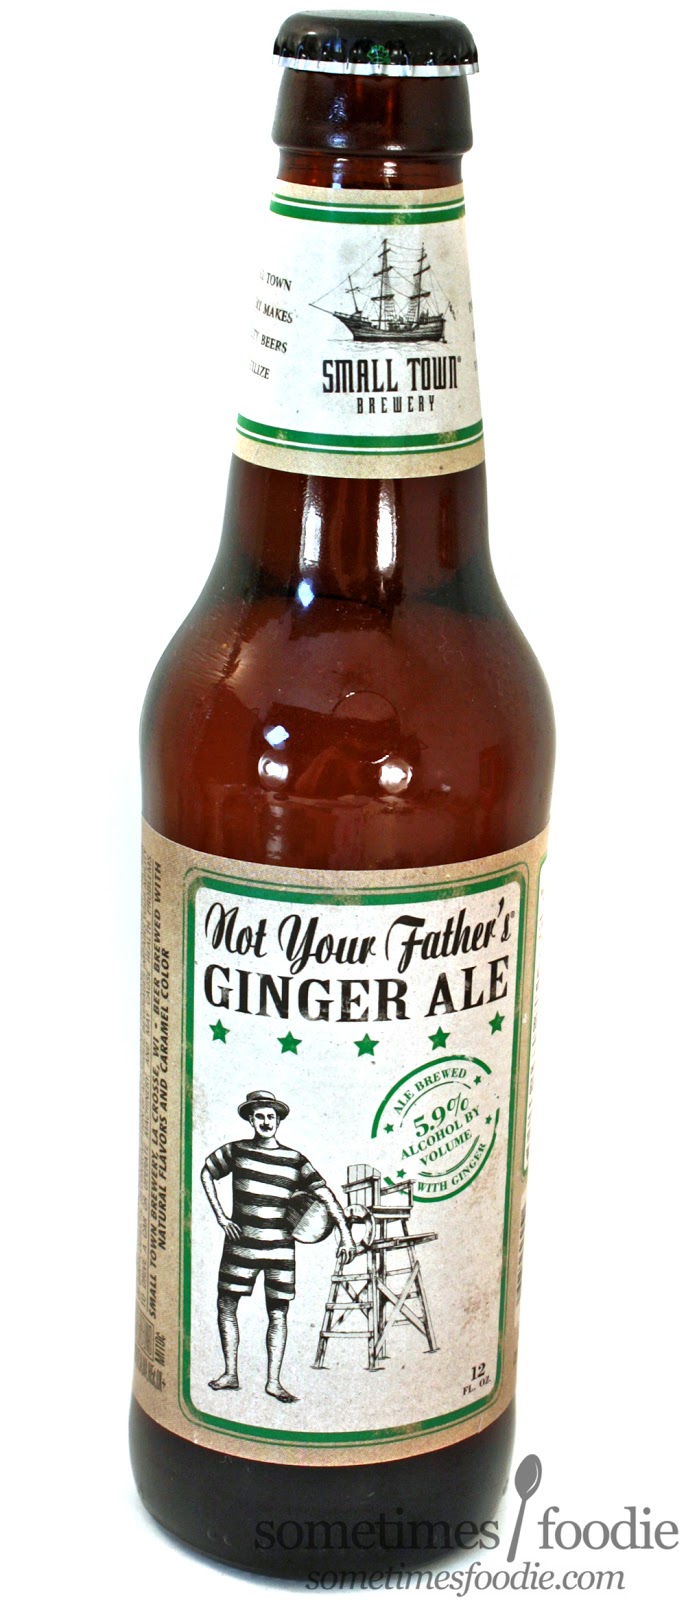 Sometimes Foodie: Sometimes Tipsy? Hard Ginger Ale Review